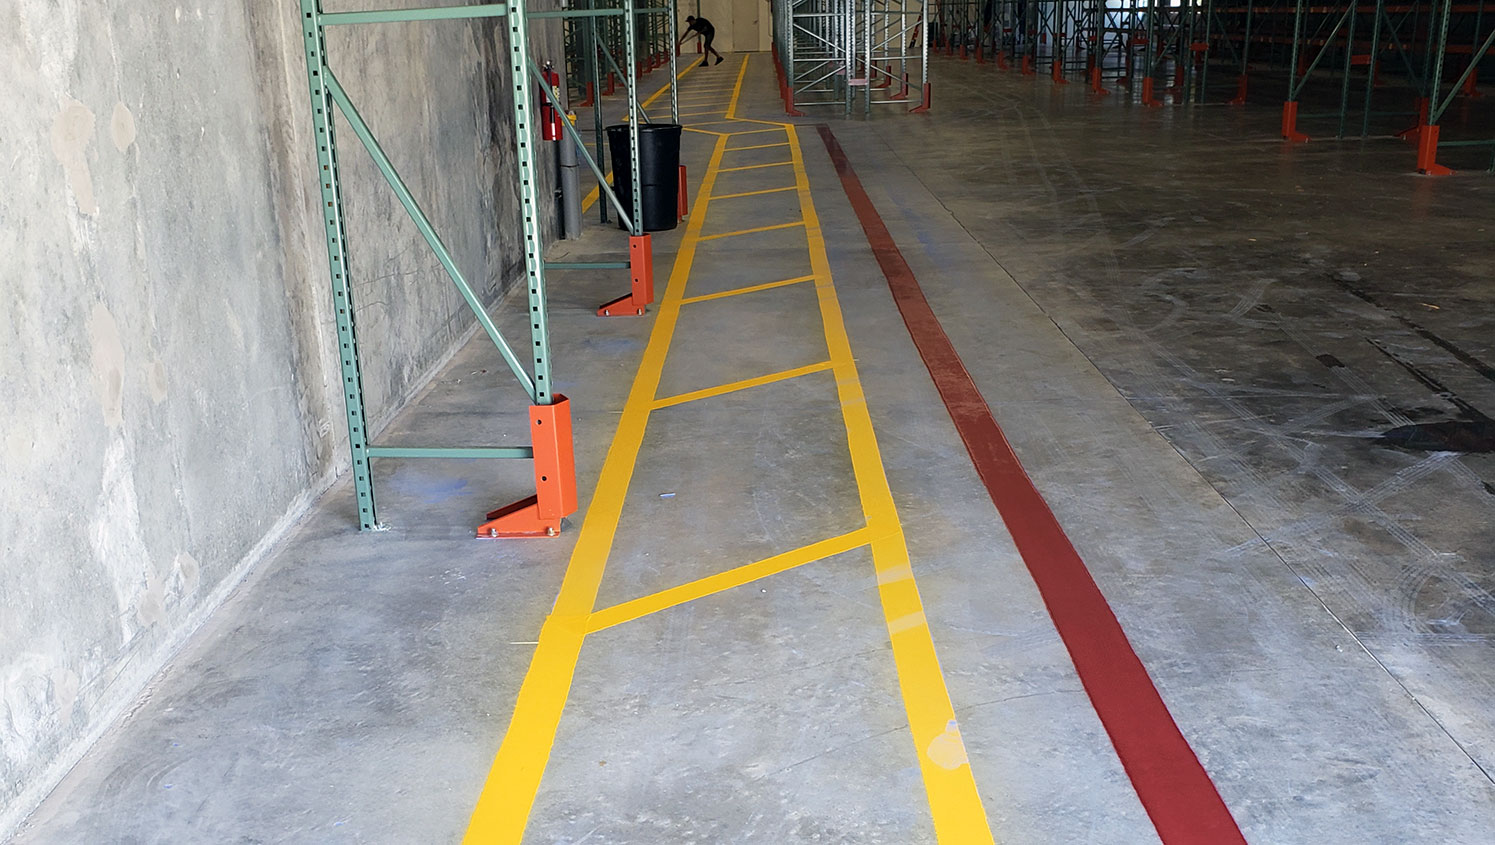 yellow and red safety lane markings in new warehouse